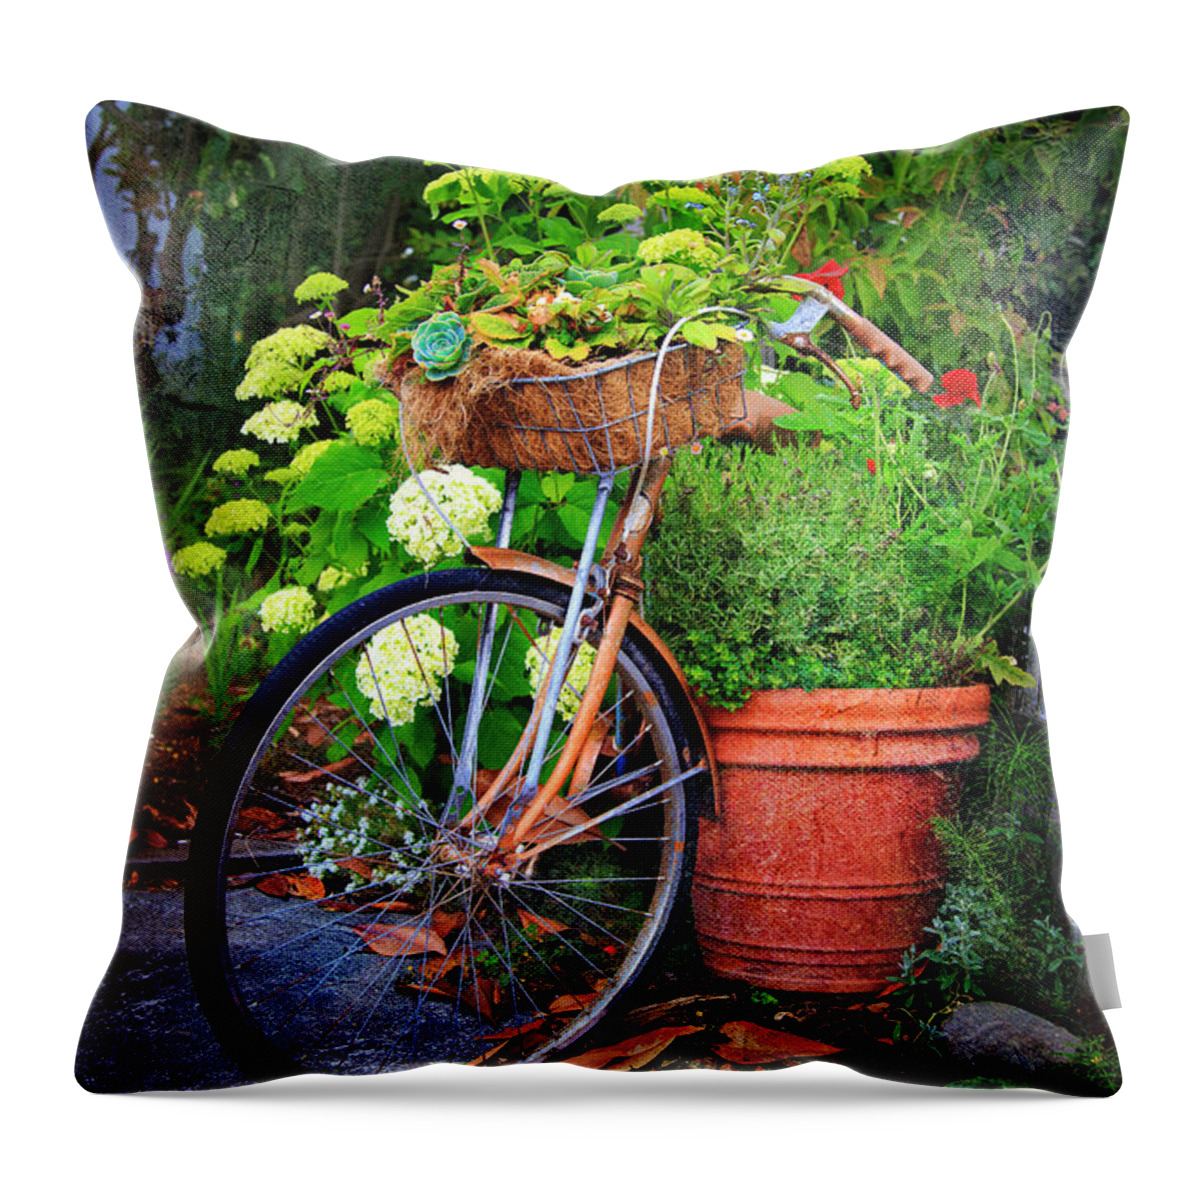 American Throw Pillow featuring the photograph Fern Dale Flower Bicycle by Craig J Satterlee